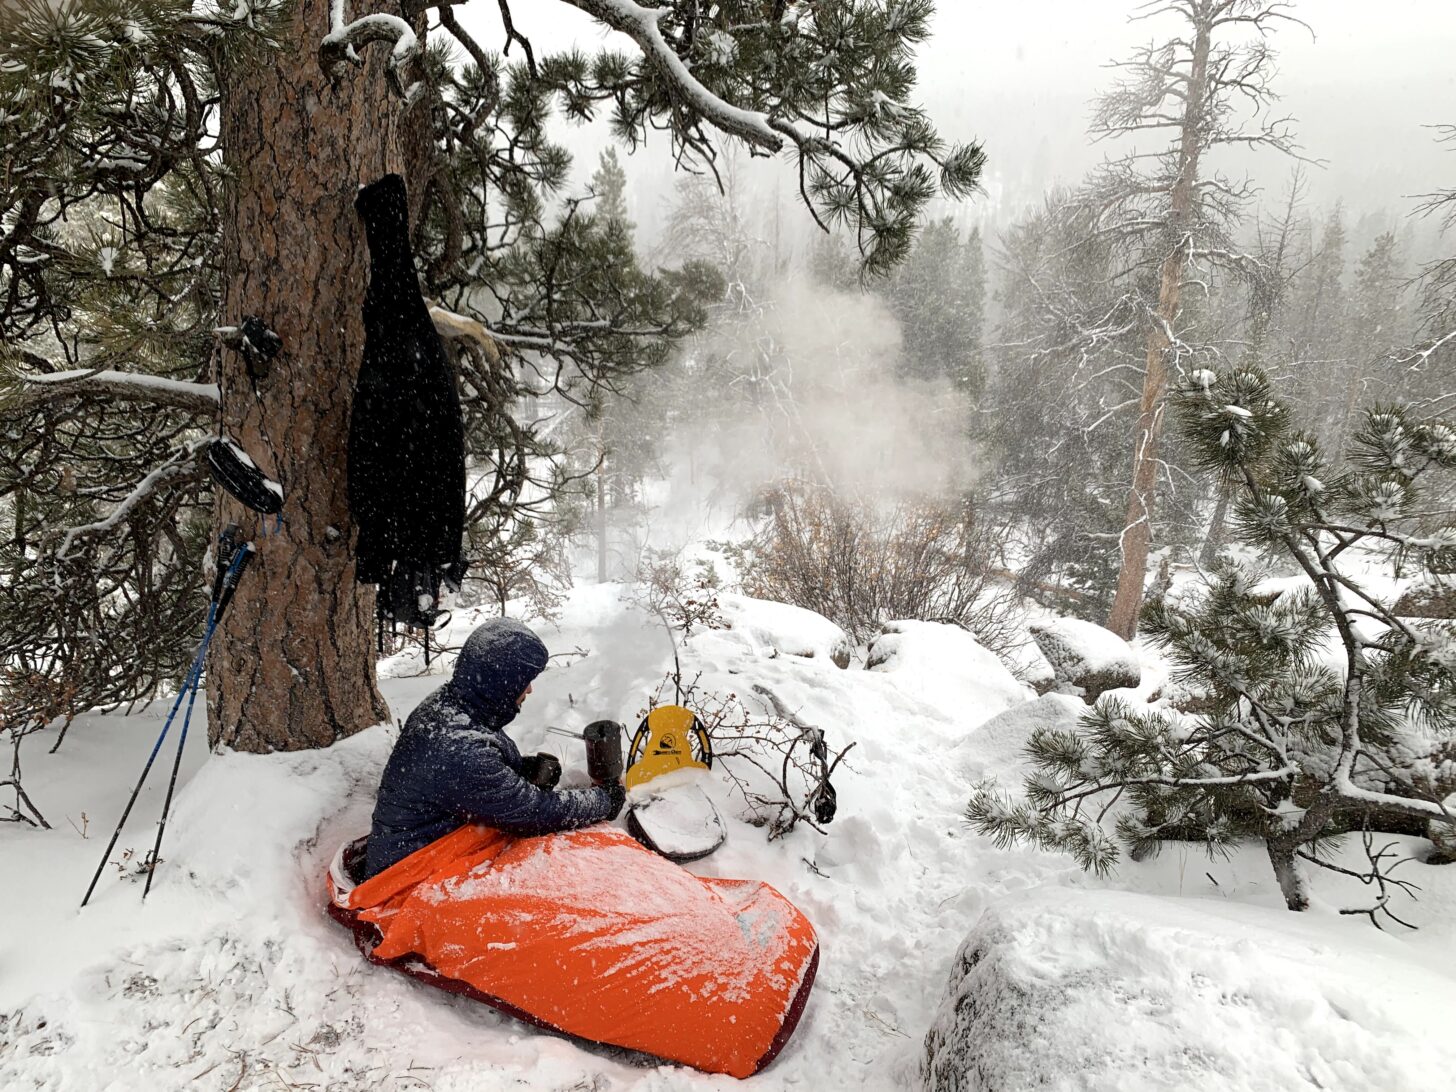 hiker camping in a bivy sack in a snowy forest, cooking on a stove